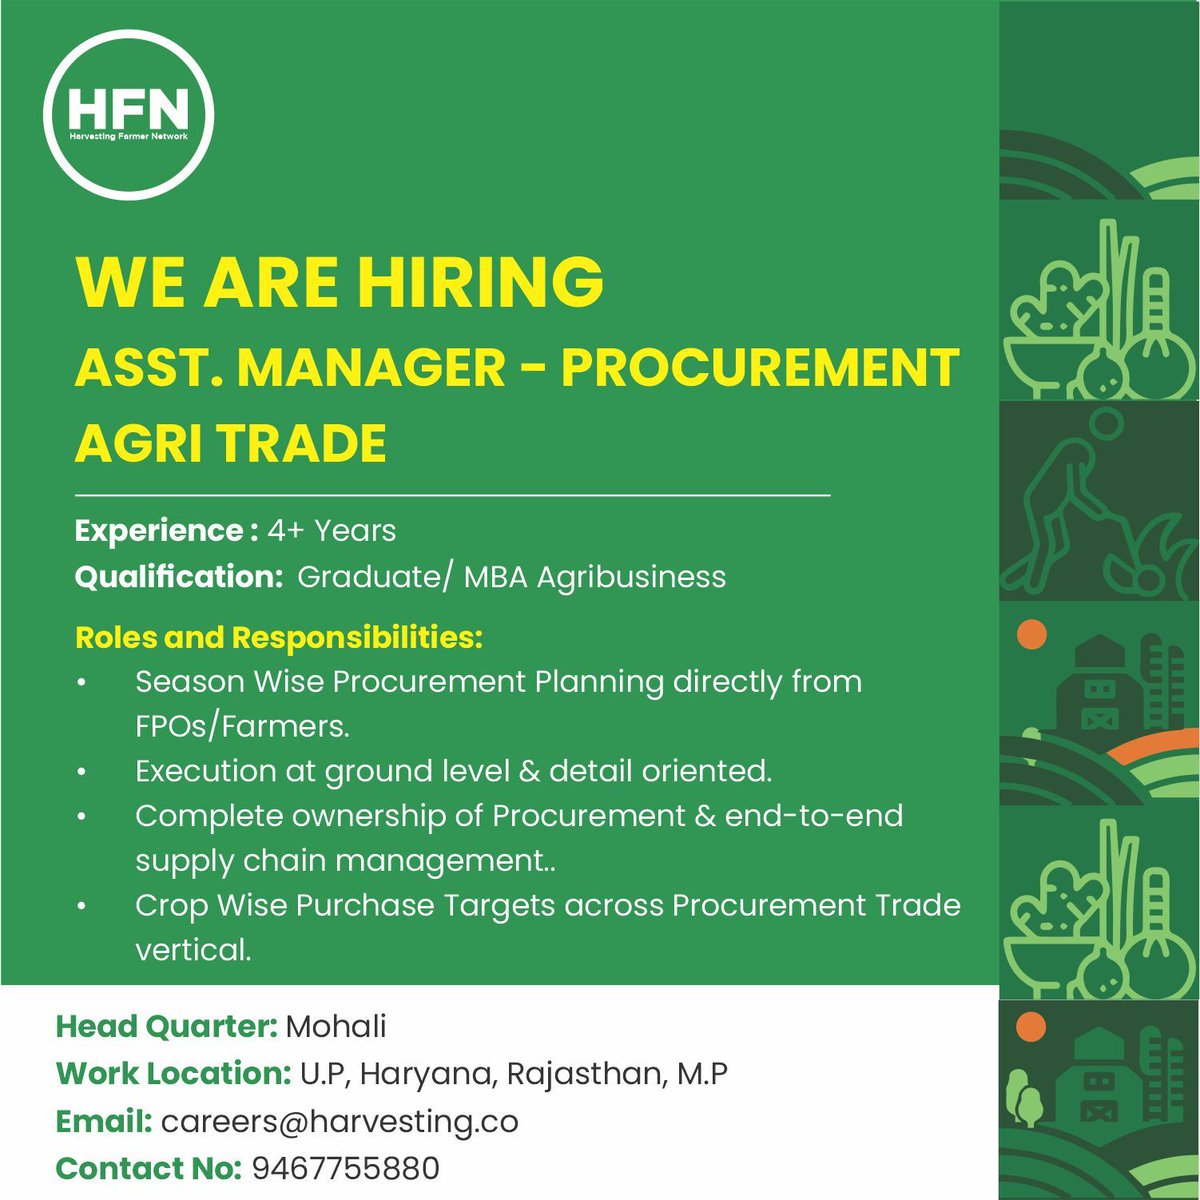 We are hiring!!!

We are searching for an Assistant Manager in Procurement (Agritrade) with a minimum of 4+ years of experience. The ideal candidate should be responsible for season-wise procurement planning directly from FPOs/Farmers and should oversee complete ownership of